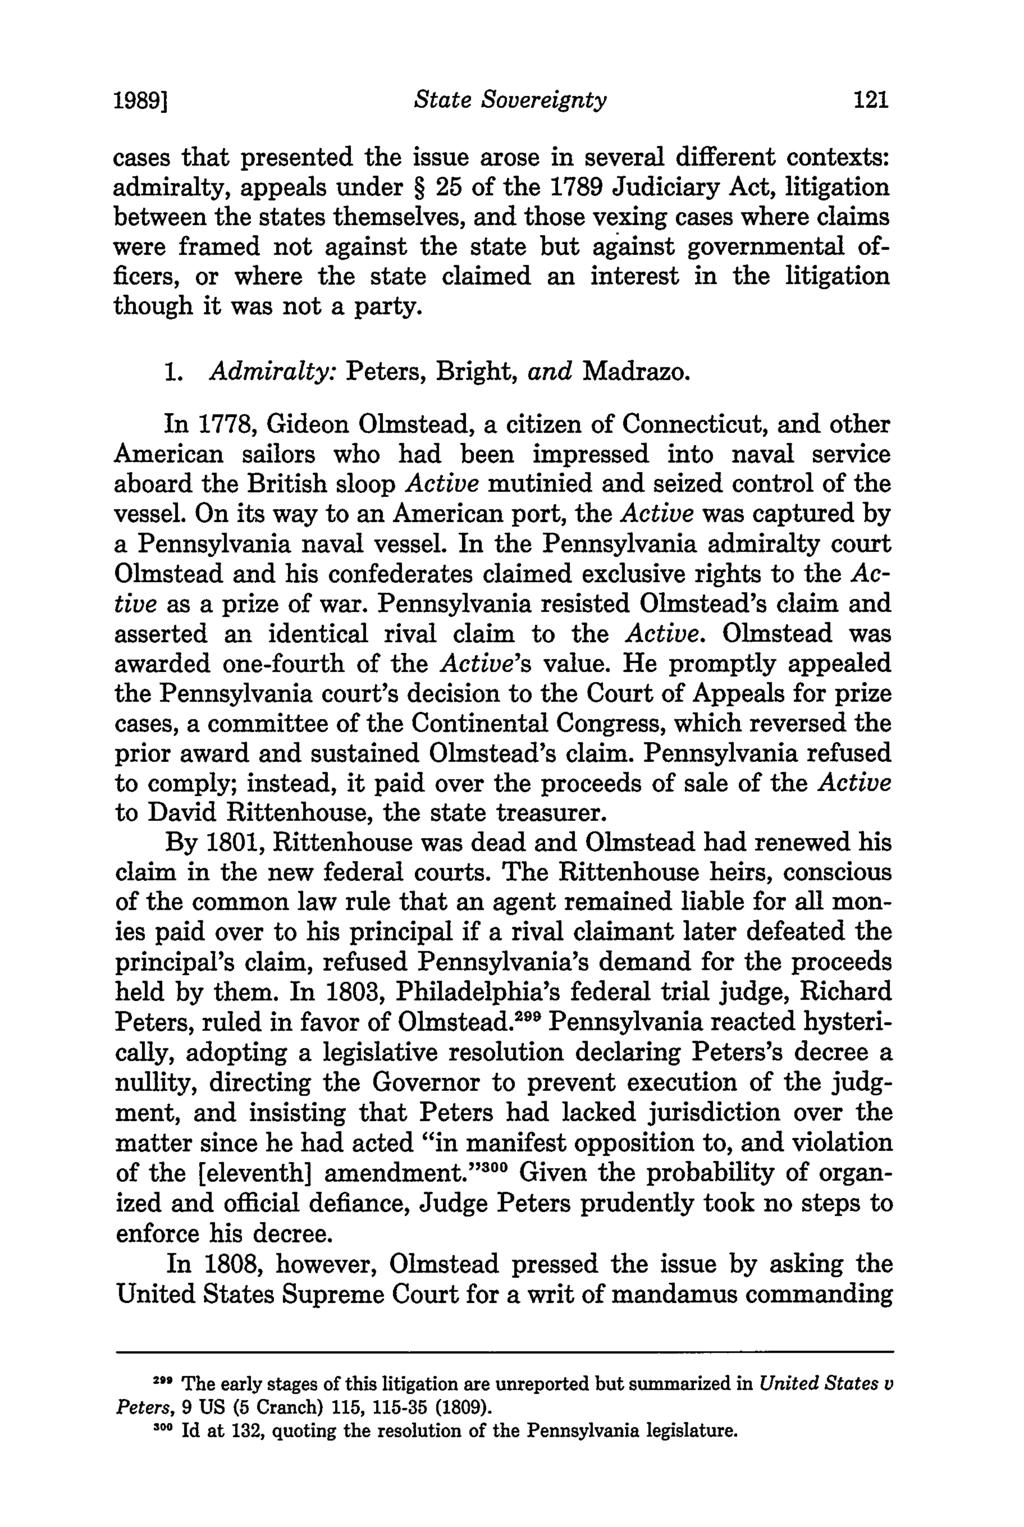 1989] State Sovereignty cases that presented the issue arose in several different contexts: admiralty, appeals under 25 of the 1789 Judiciary Act, litigation between the states themselves, and those